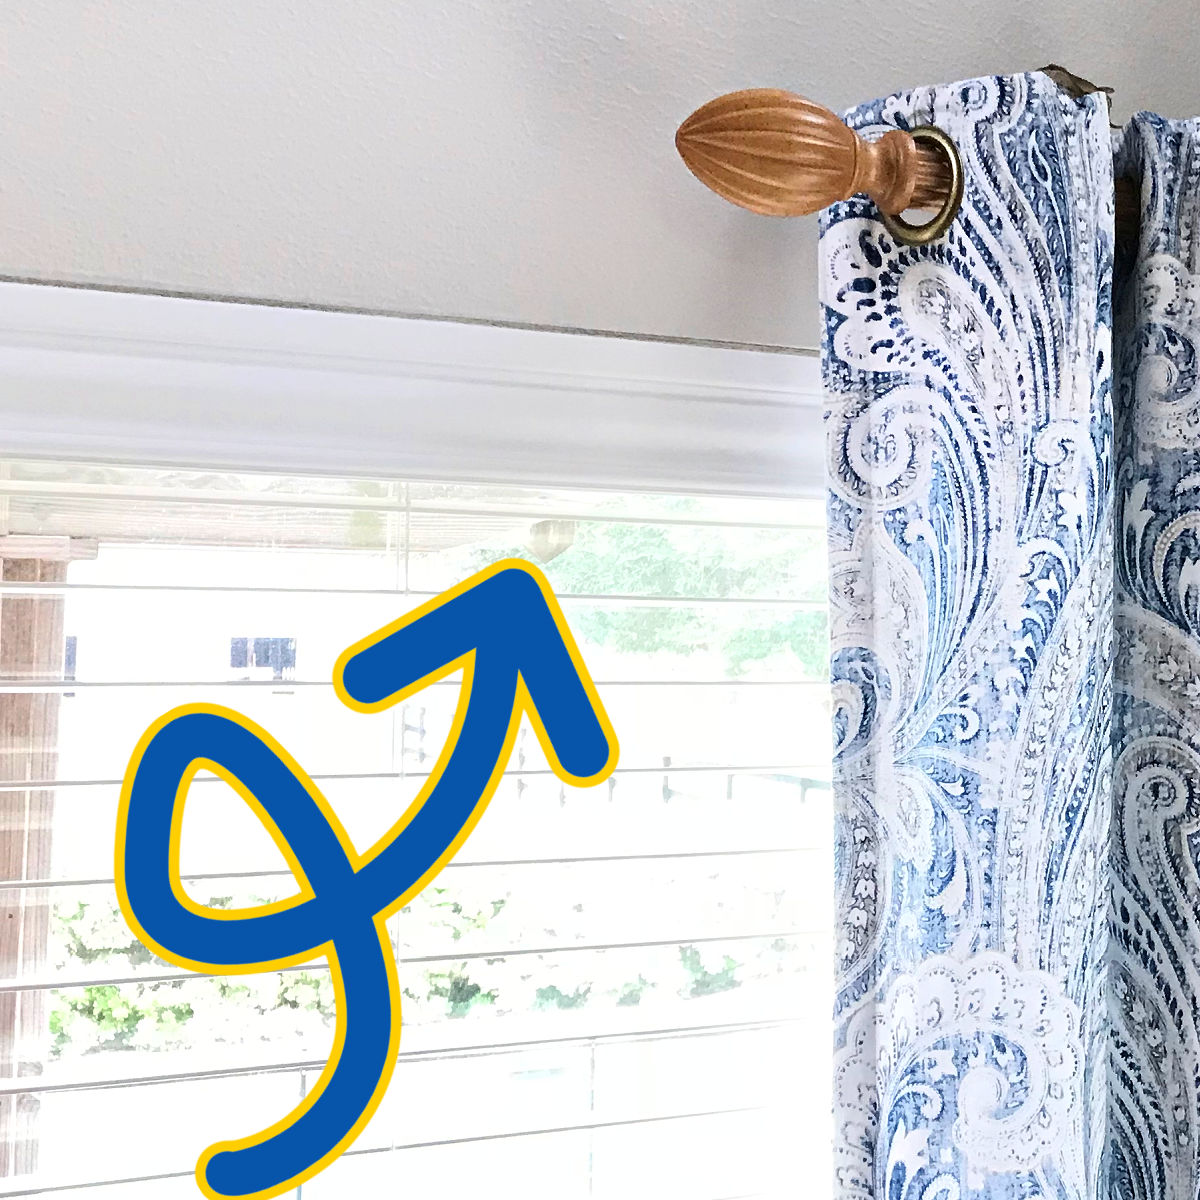 How to Replace or Fix Broken Valance Clips on Blinds - Abbotts At Home